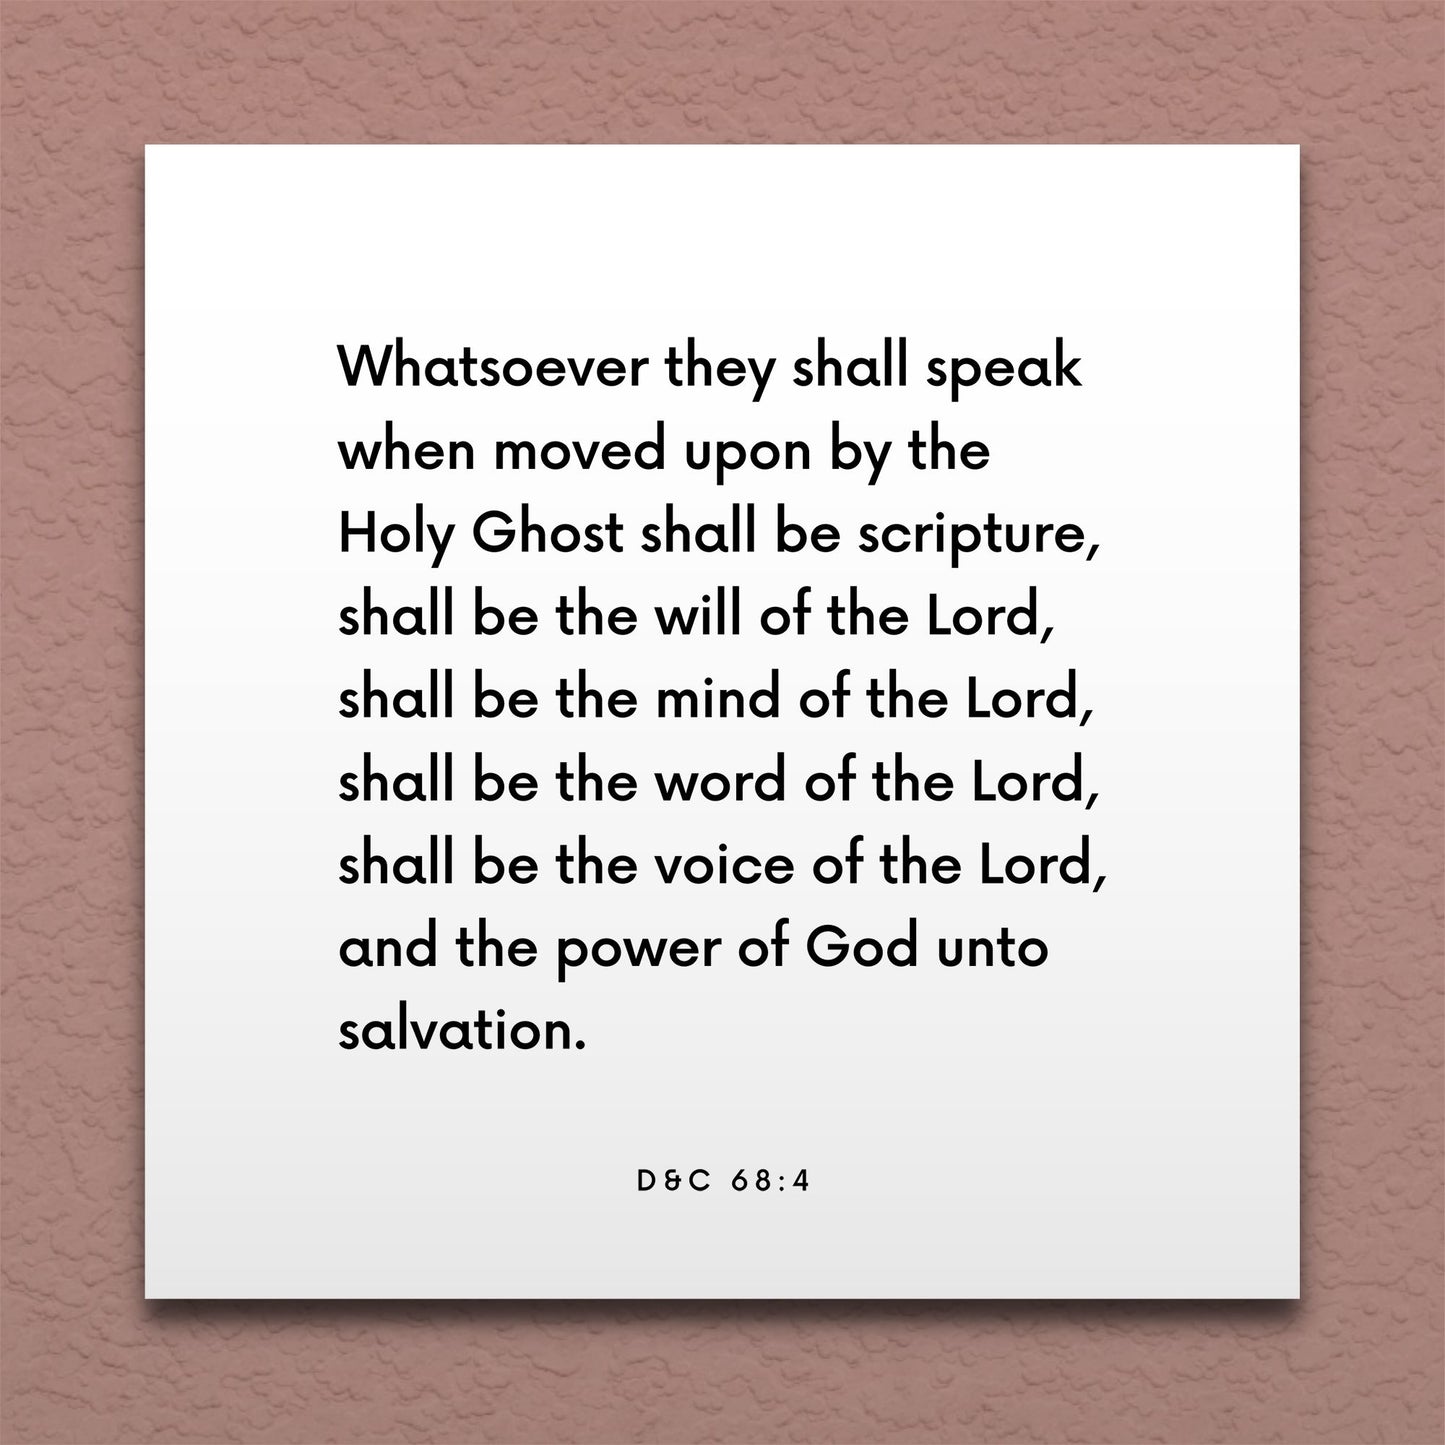 Wall-mounted scripture tile for D&C 68:4 - "Whatsoever they shall speak shall be scripture"